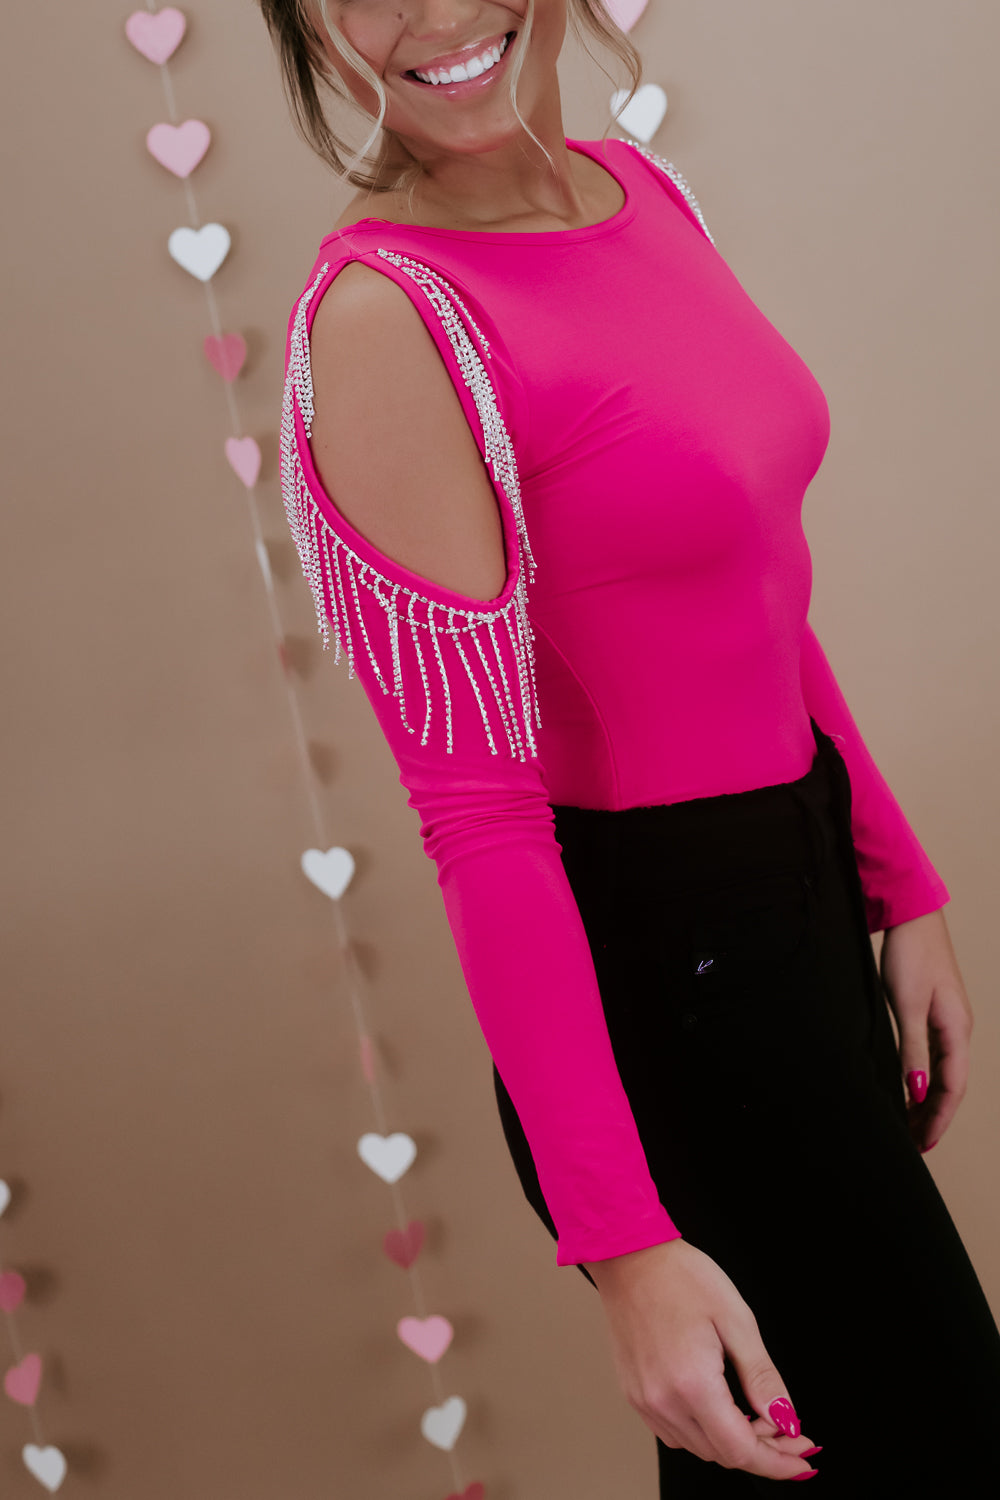 Hot Pink Long Sleeve Bodysuit With Rhinestones · Filly Flair